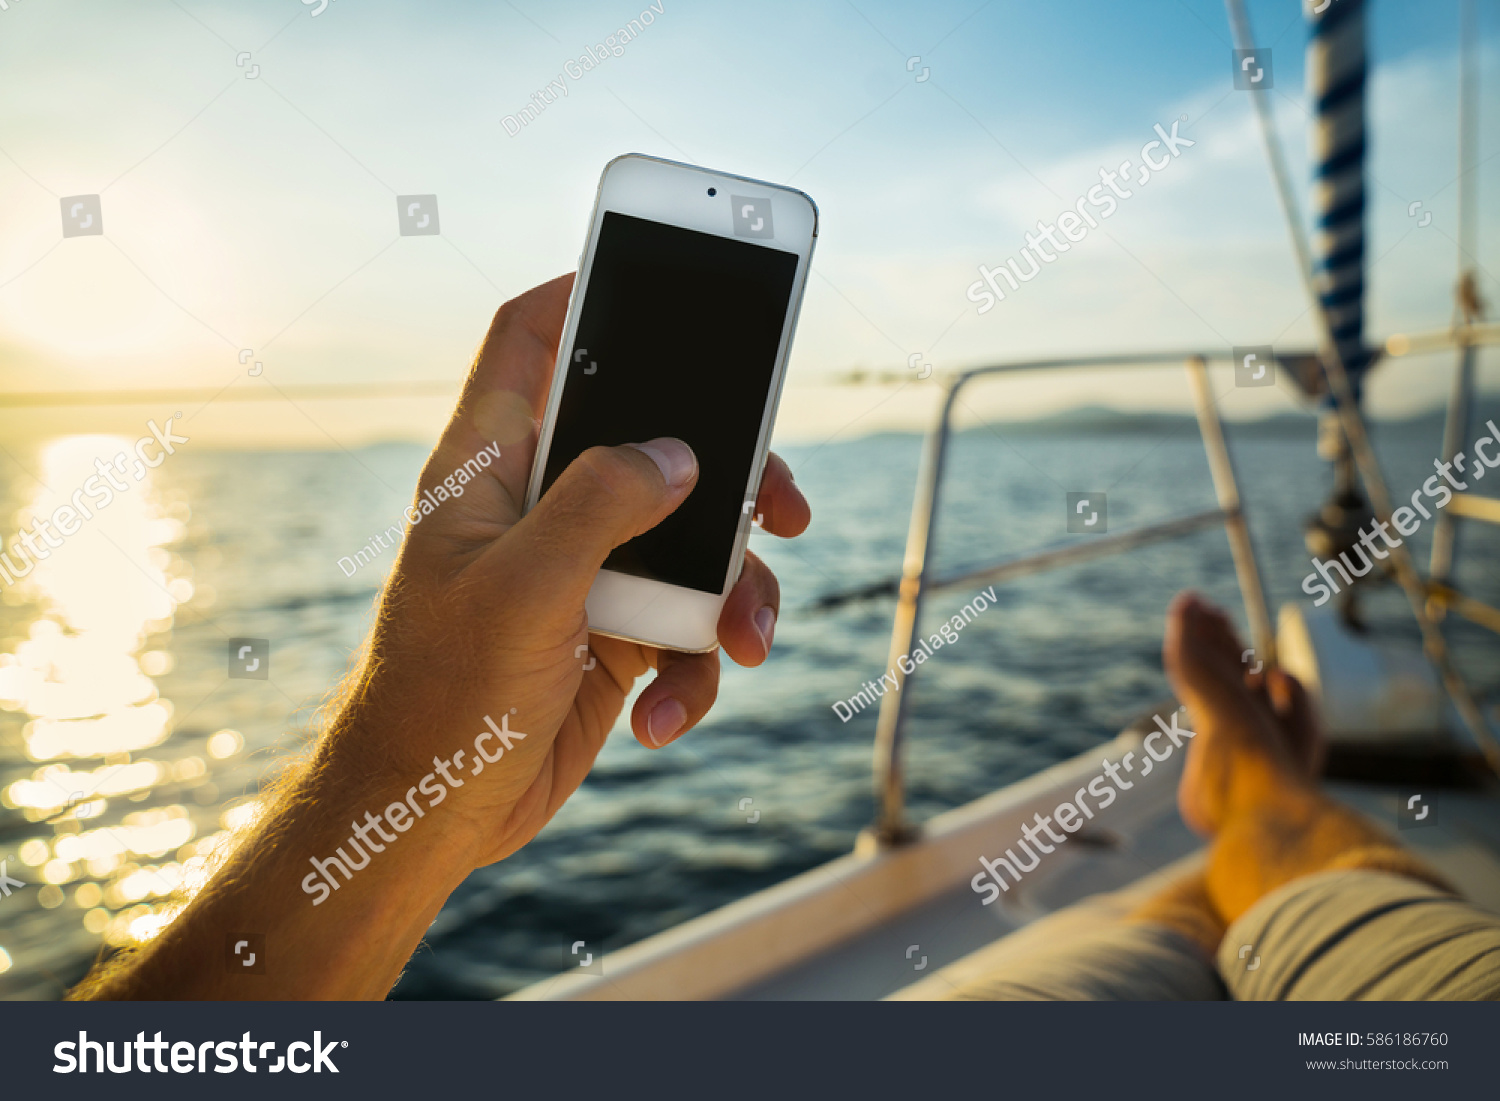 Summer leisure. Rest on a yacht with a phone in his hand. Man lying on the deck and enjoy your smartphone. The guy doing the photo feet on the background seascape and yachts. #586186760